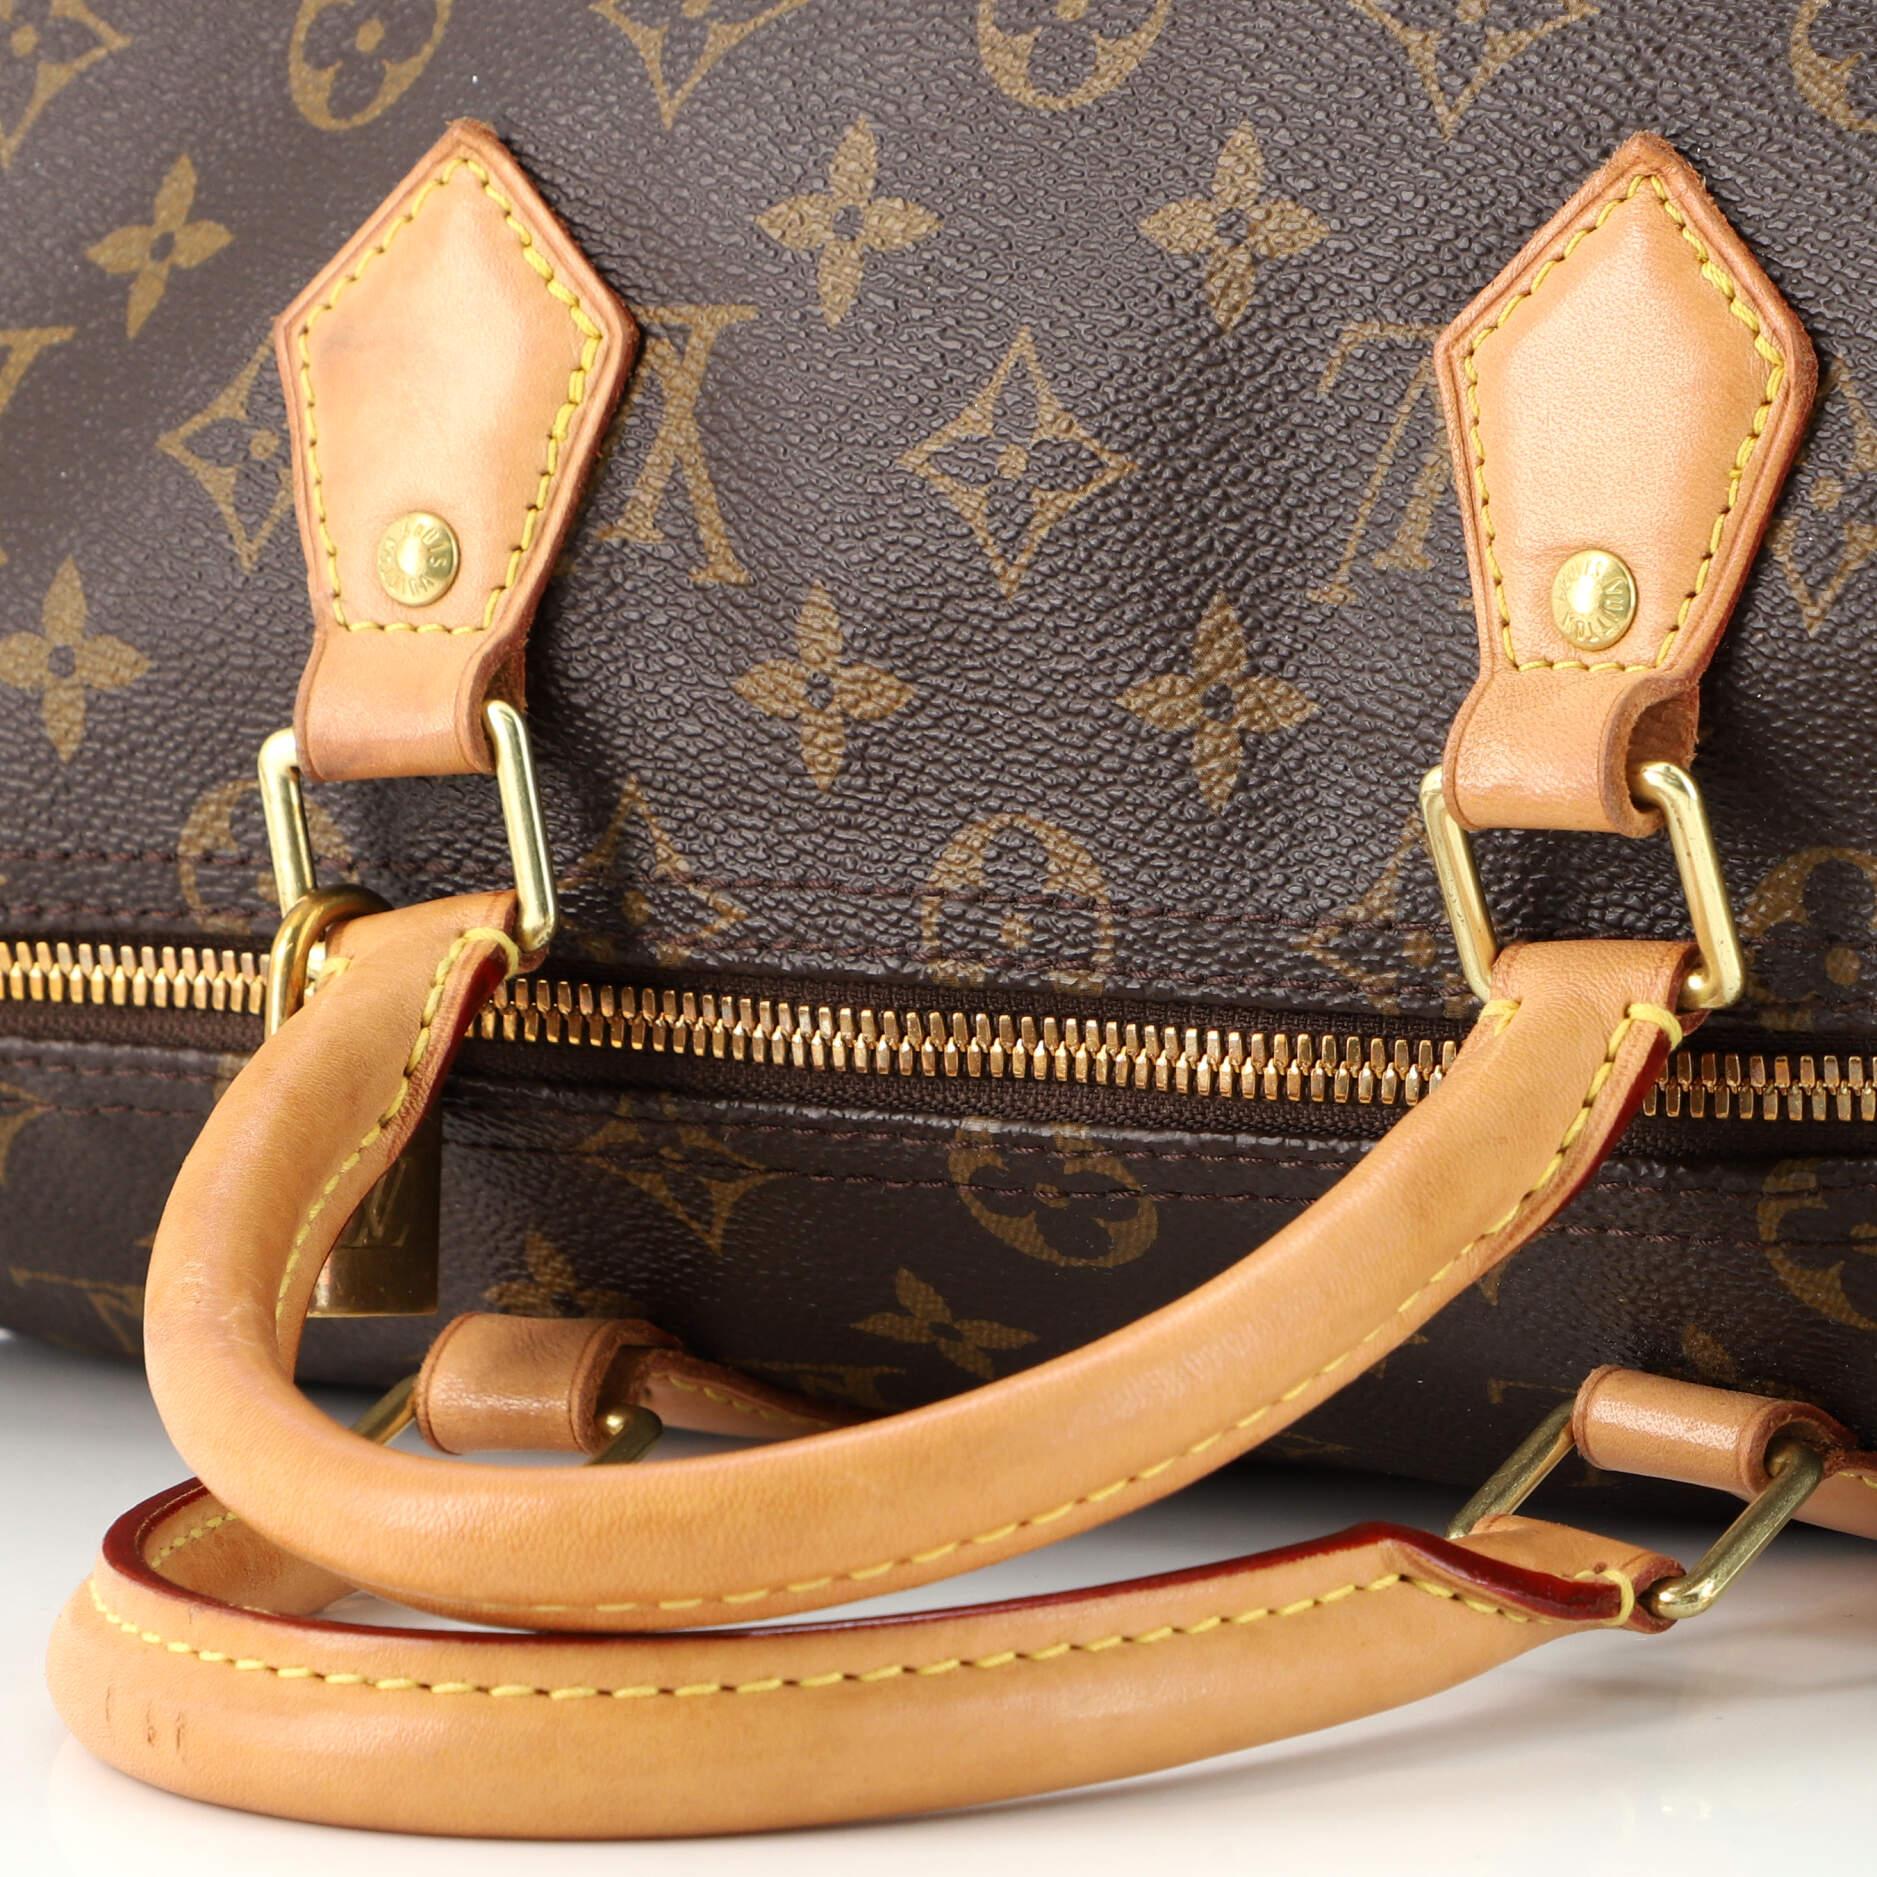 Louis Vuitton Speedy Bandouliere Bag Monogram Canvas 35 In Good Condition In NY, NY